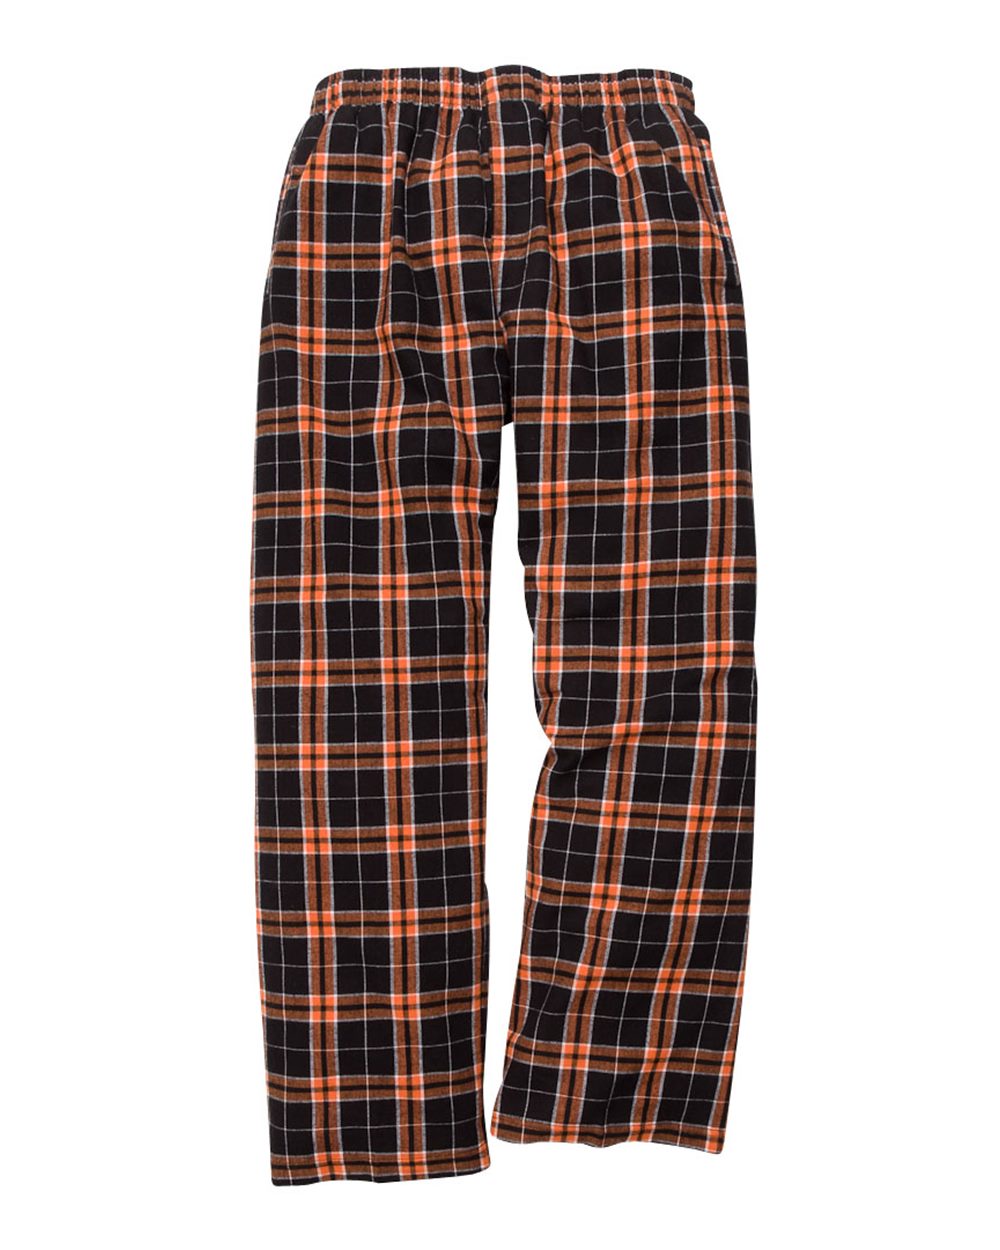 Boxercraft Y20 - Youth Flannel Pants with Pockets $16.14